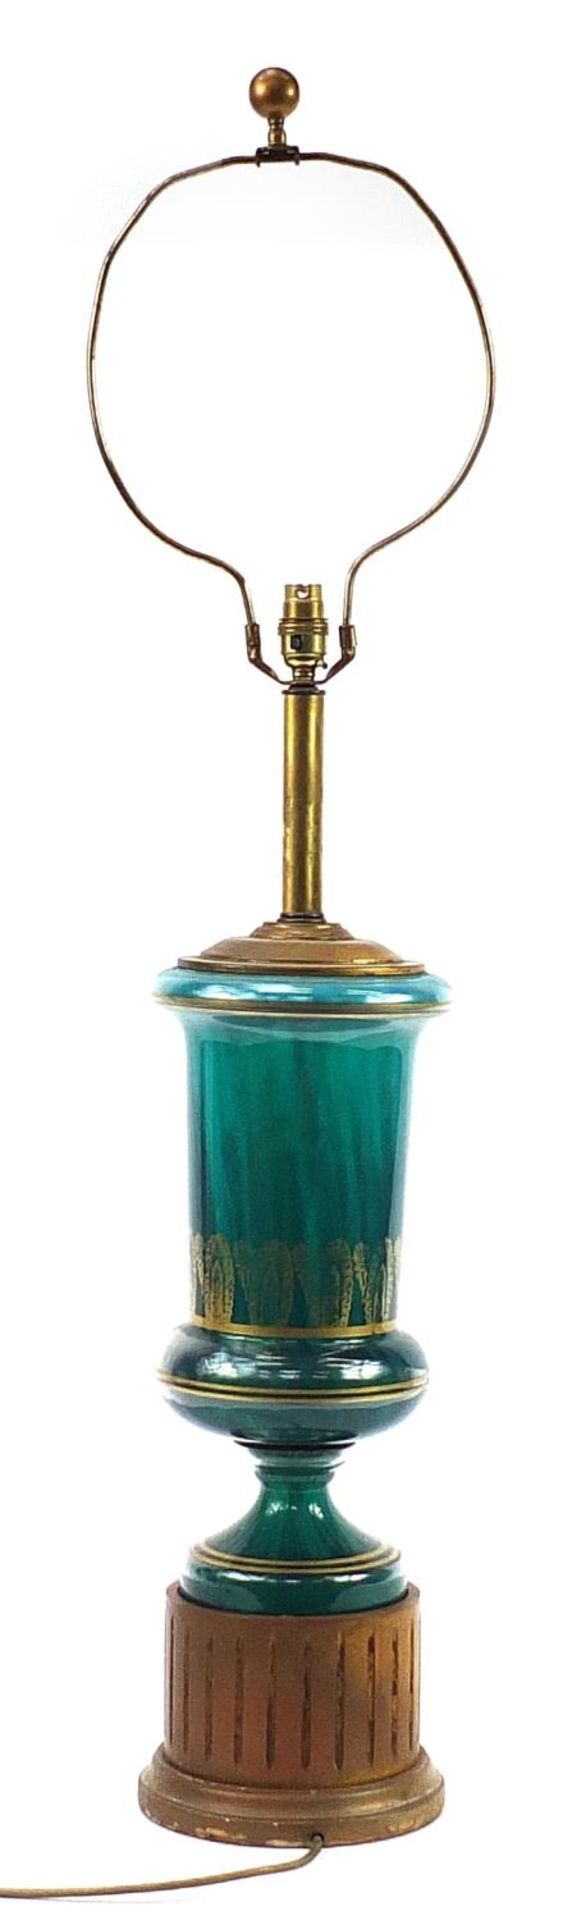 Green glass table lamp with gilded decoration and column base, 107cm high - Image 2 of 3